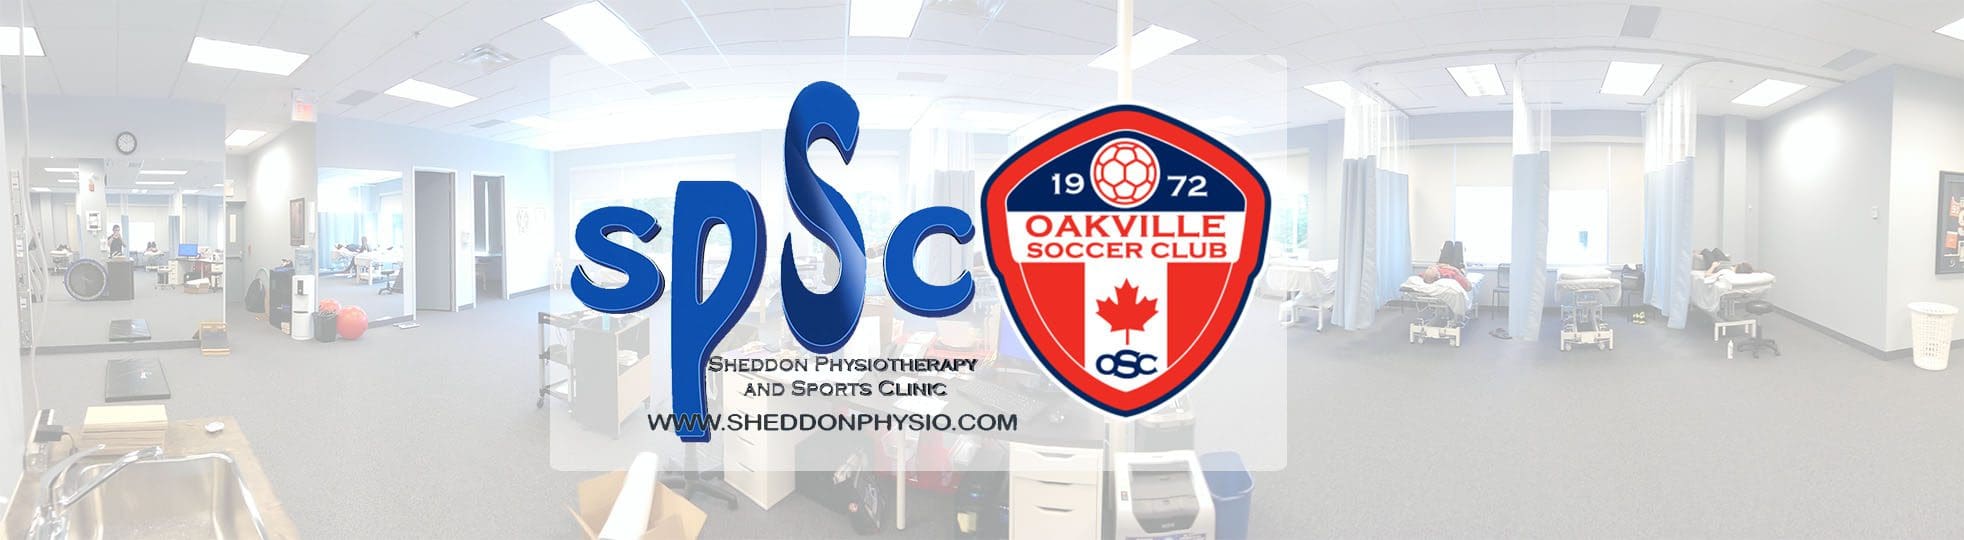 Sheddon Physiotherapy and Sports Clinic’s Ongoing Partnership with the OSC Community!